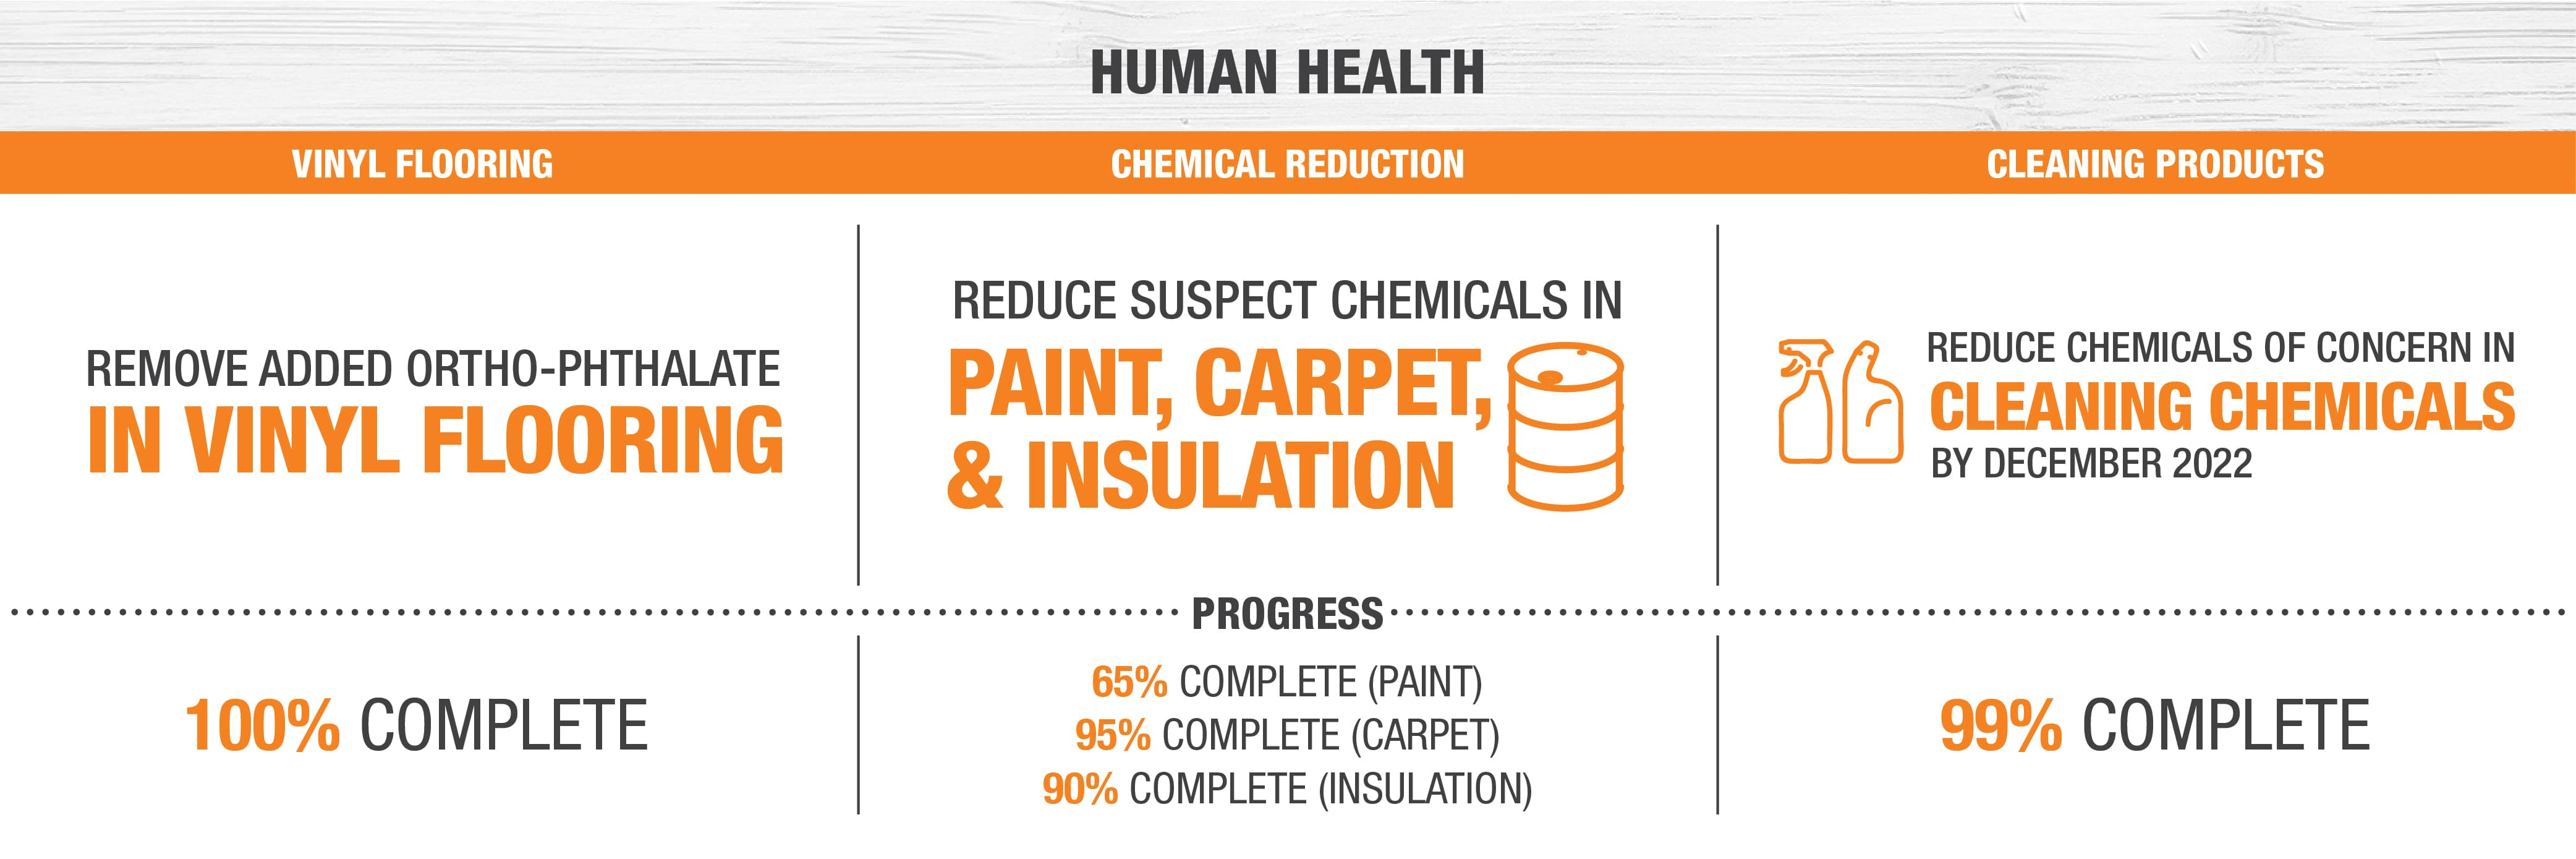 Remove added ortho-phthalate in vinyl flooring. Reduce supect chemicals in paint, carpet & insulation. Reduce chemicals of concern in cleaning chemicals by December 2022.